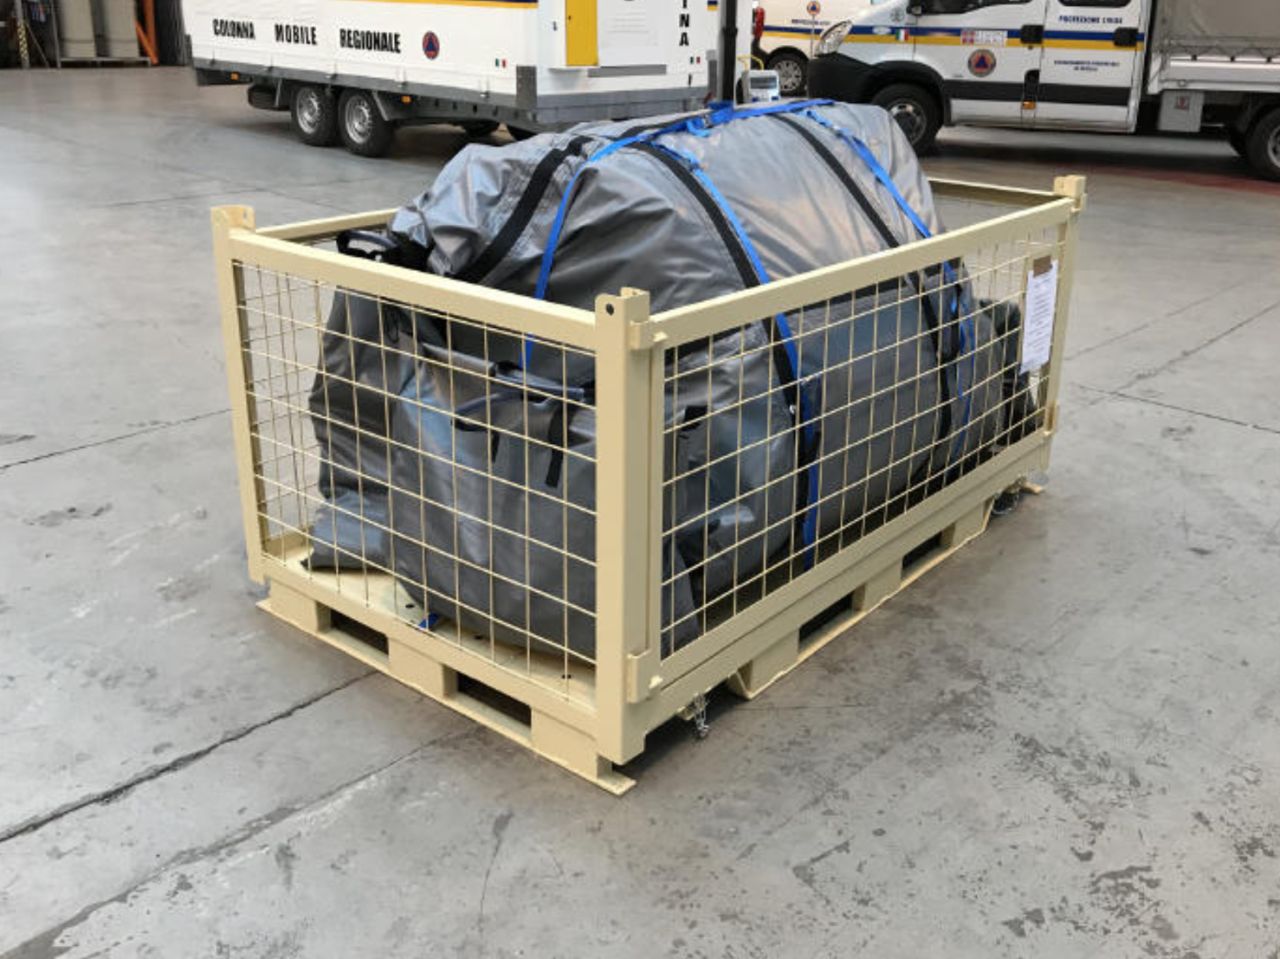 Tent in a transport crate